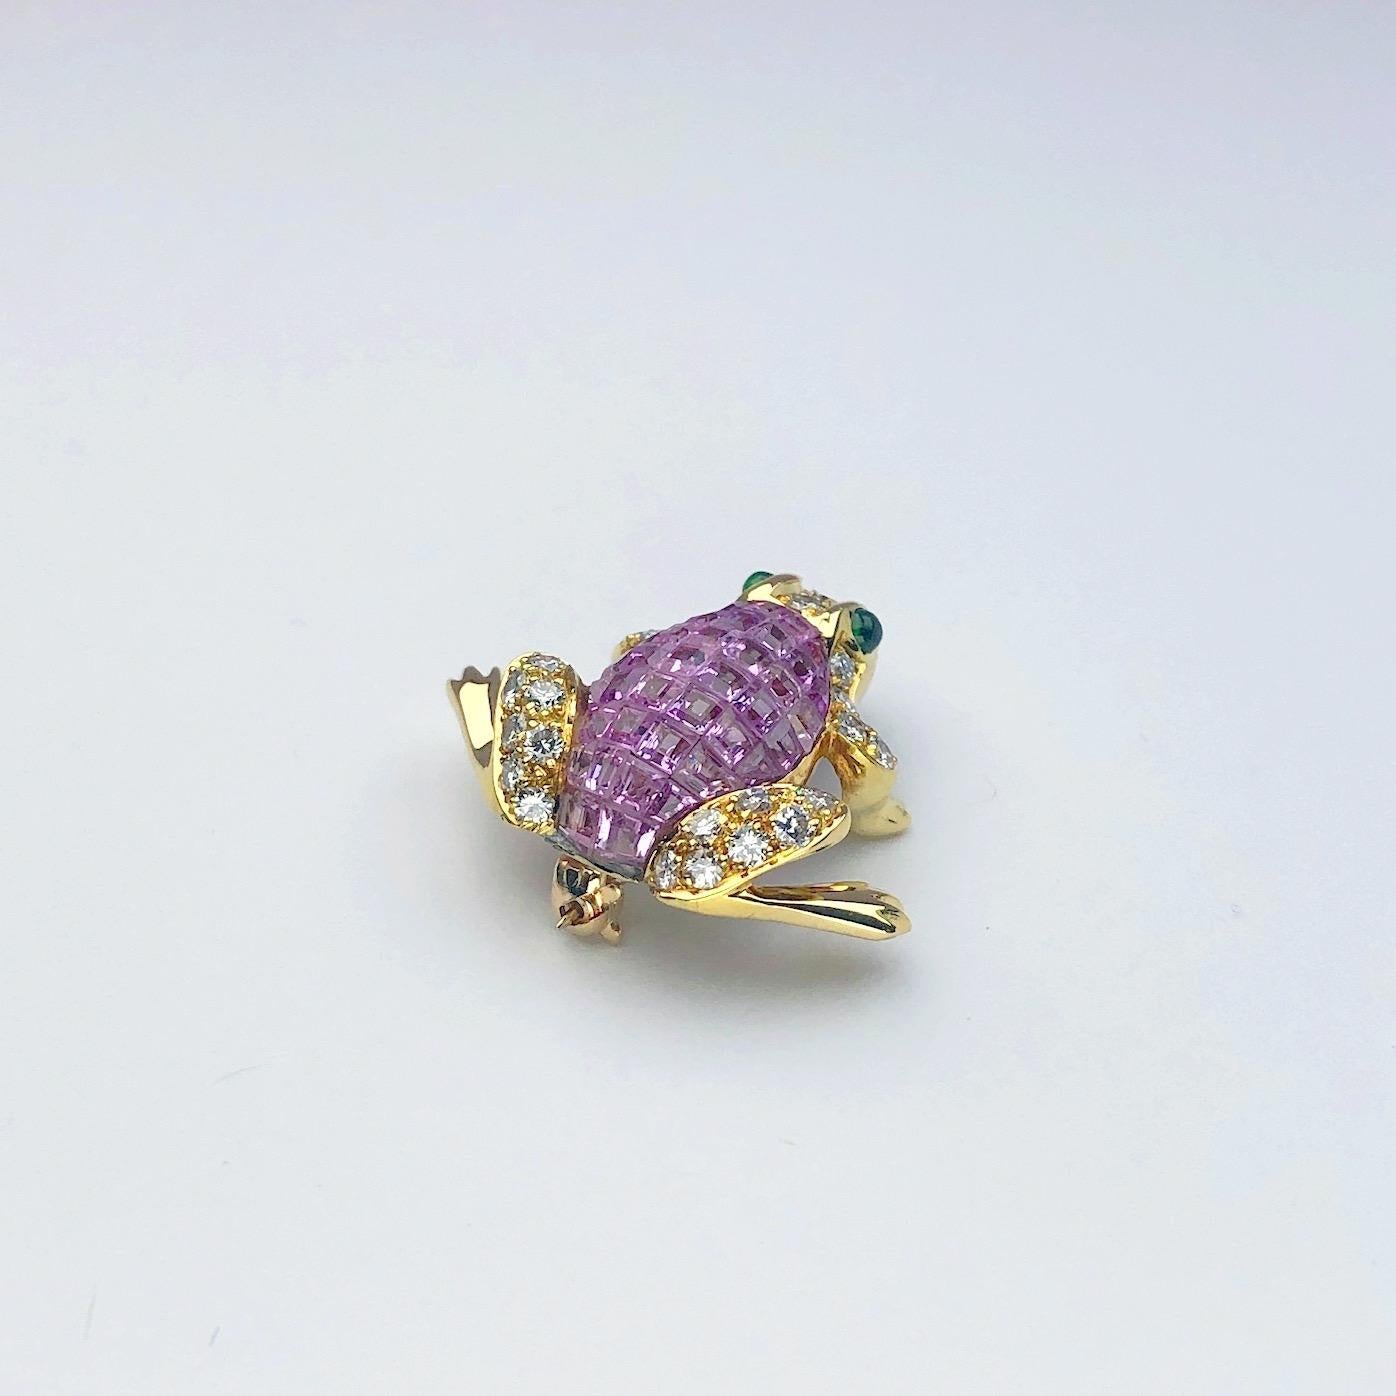 18 karat yellow gold frog brooch beautifully set with 6.12 carats of invisibly set  square pink sapphires and 0.70 carats of round diamonds. The eyes are cabochon emeralds. The frog measures 1